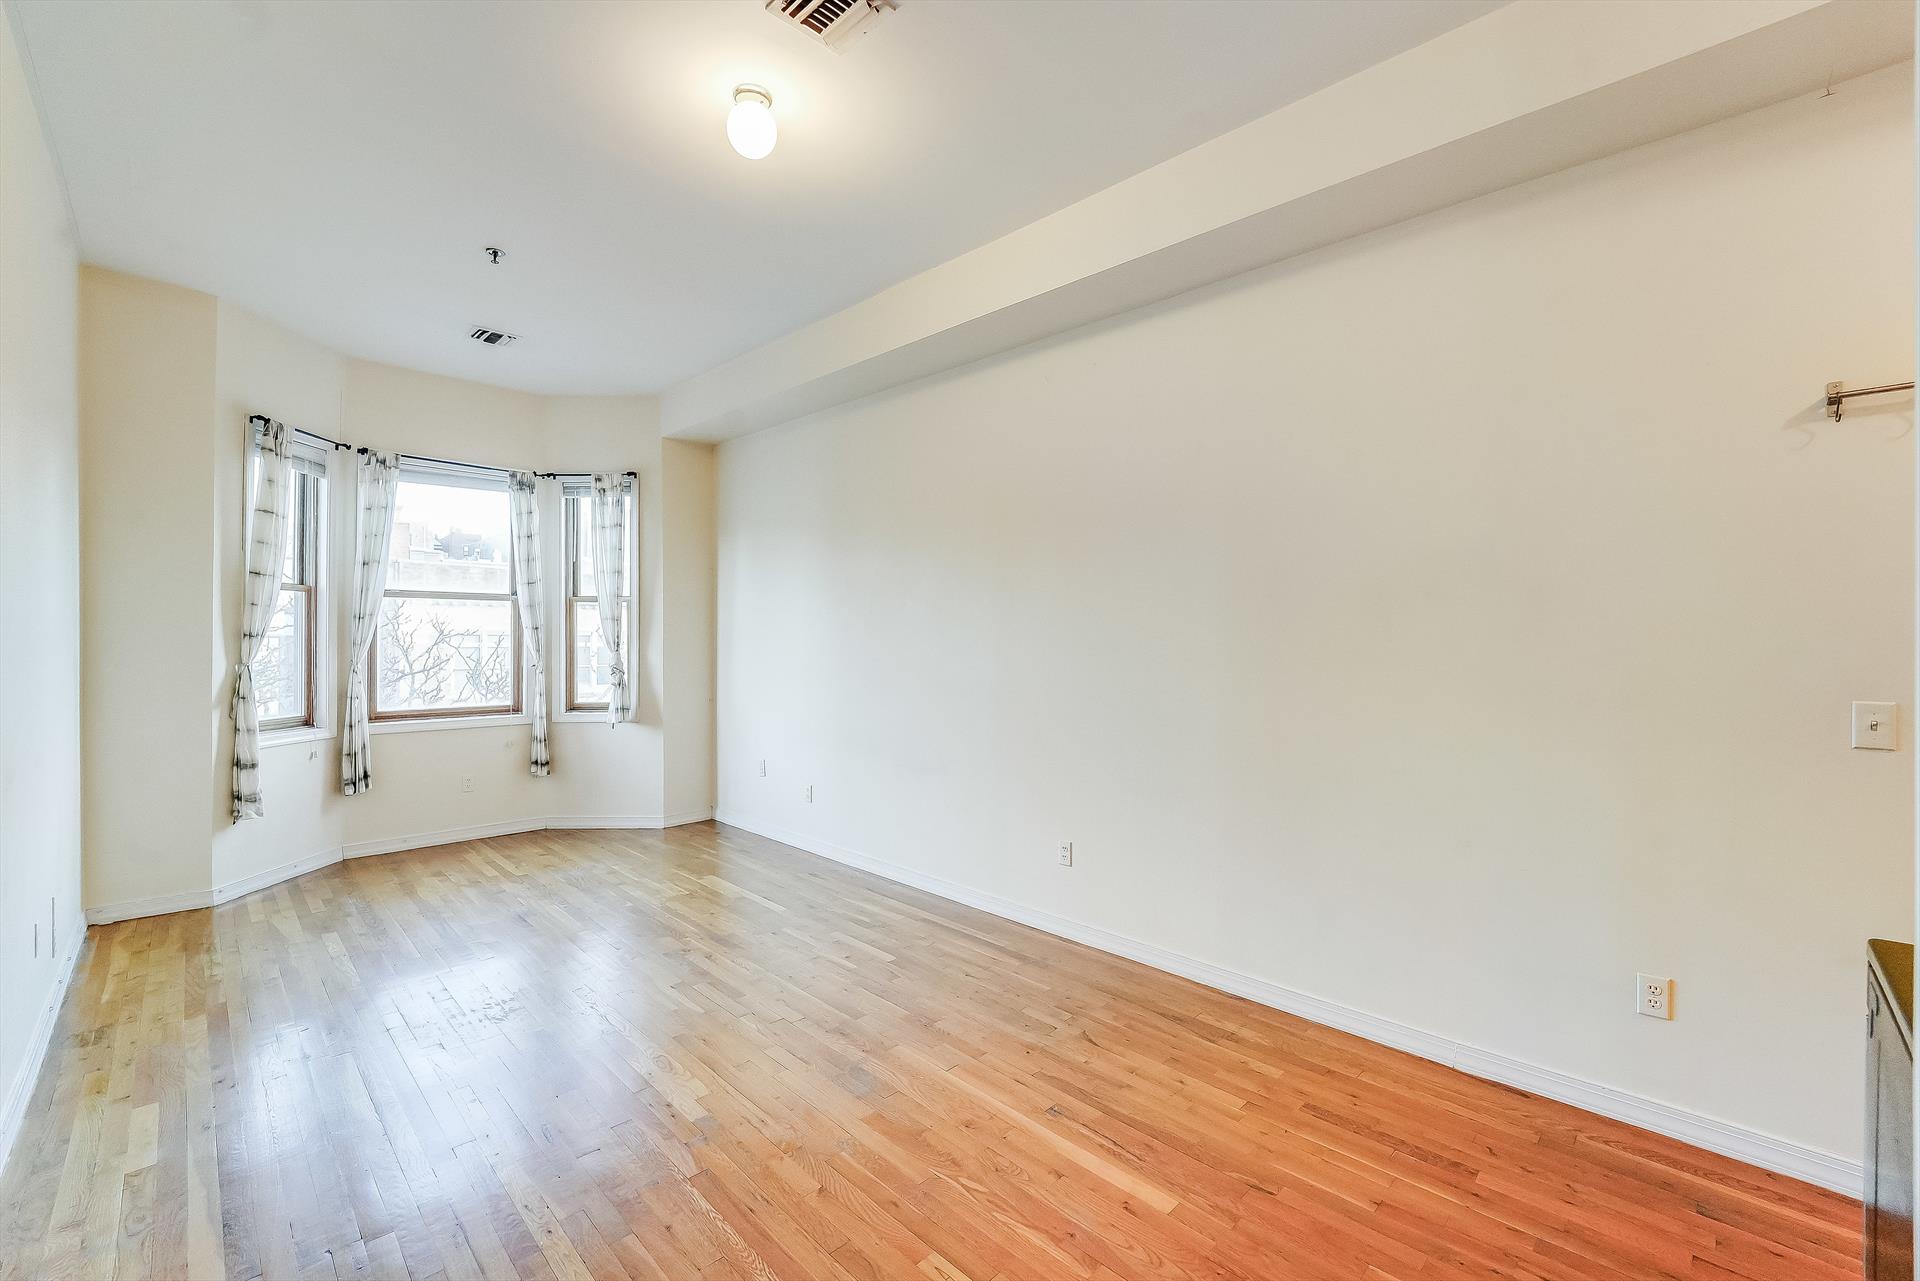 AVAIL 4/1 - Great sized 2 Bed, 1 Bath in a prime location. Unit features high ceilings / Central air and heat / hardwood floors / washer/dryer in bldg. Great space and layout. Prime location to all night life and transportation to NYC. Schedule a viewing today!